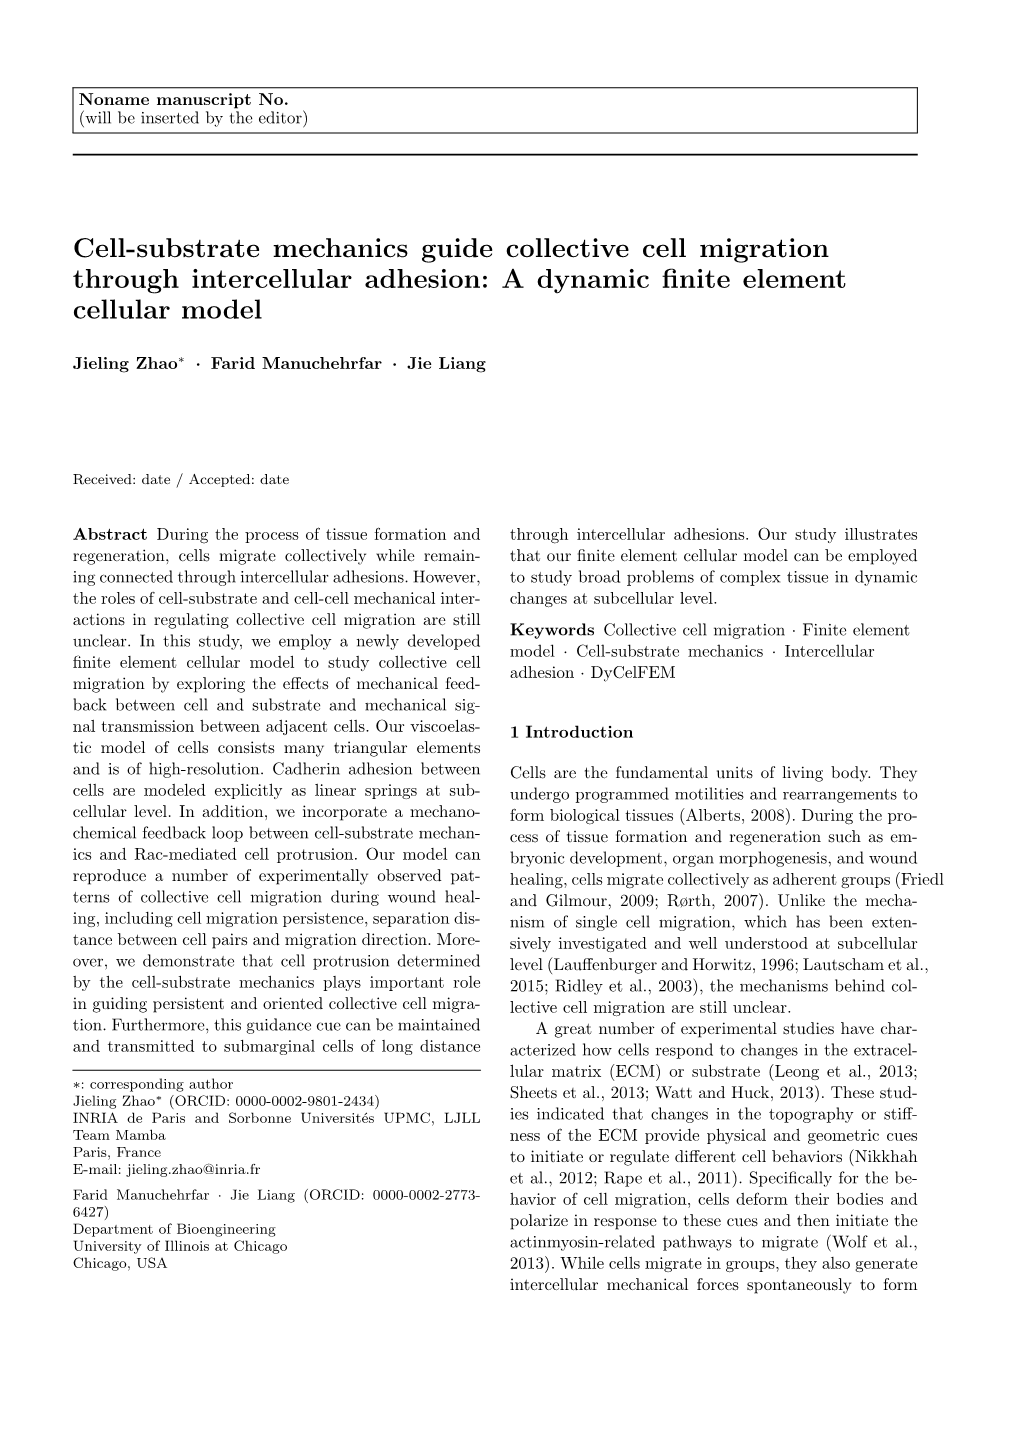 Cell-Substrate Mechanics Guide Collective Cell Migration Through Intercellular Adhesion: a Dynamic ﬁnite Element Cellular Model